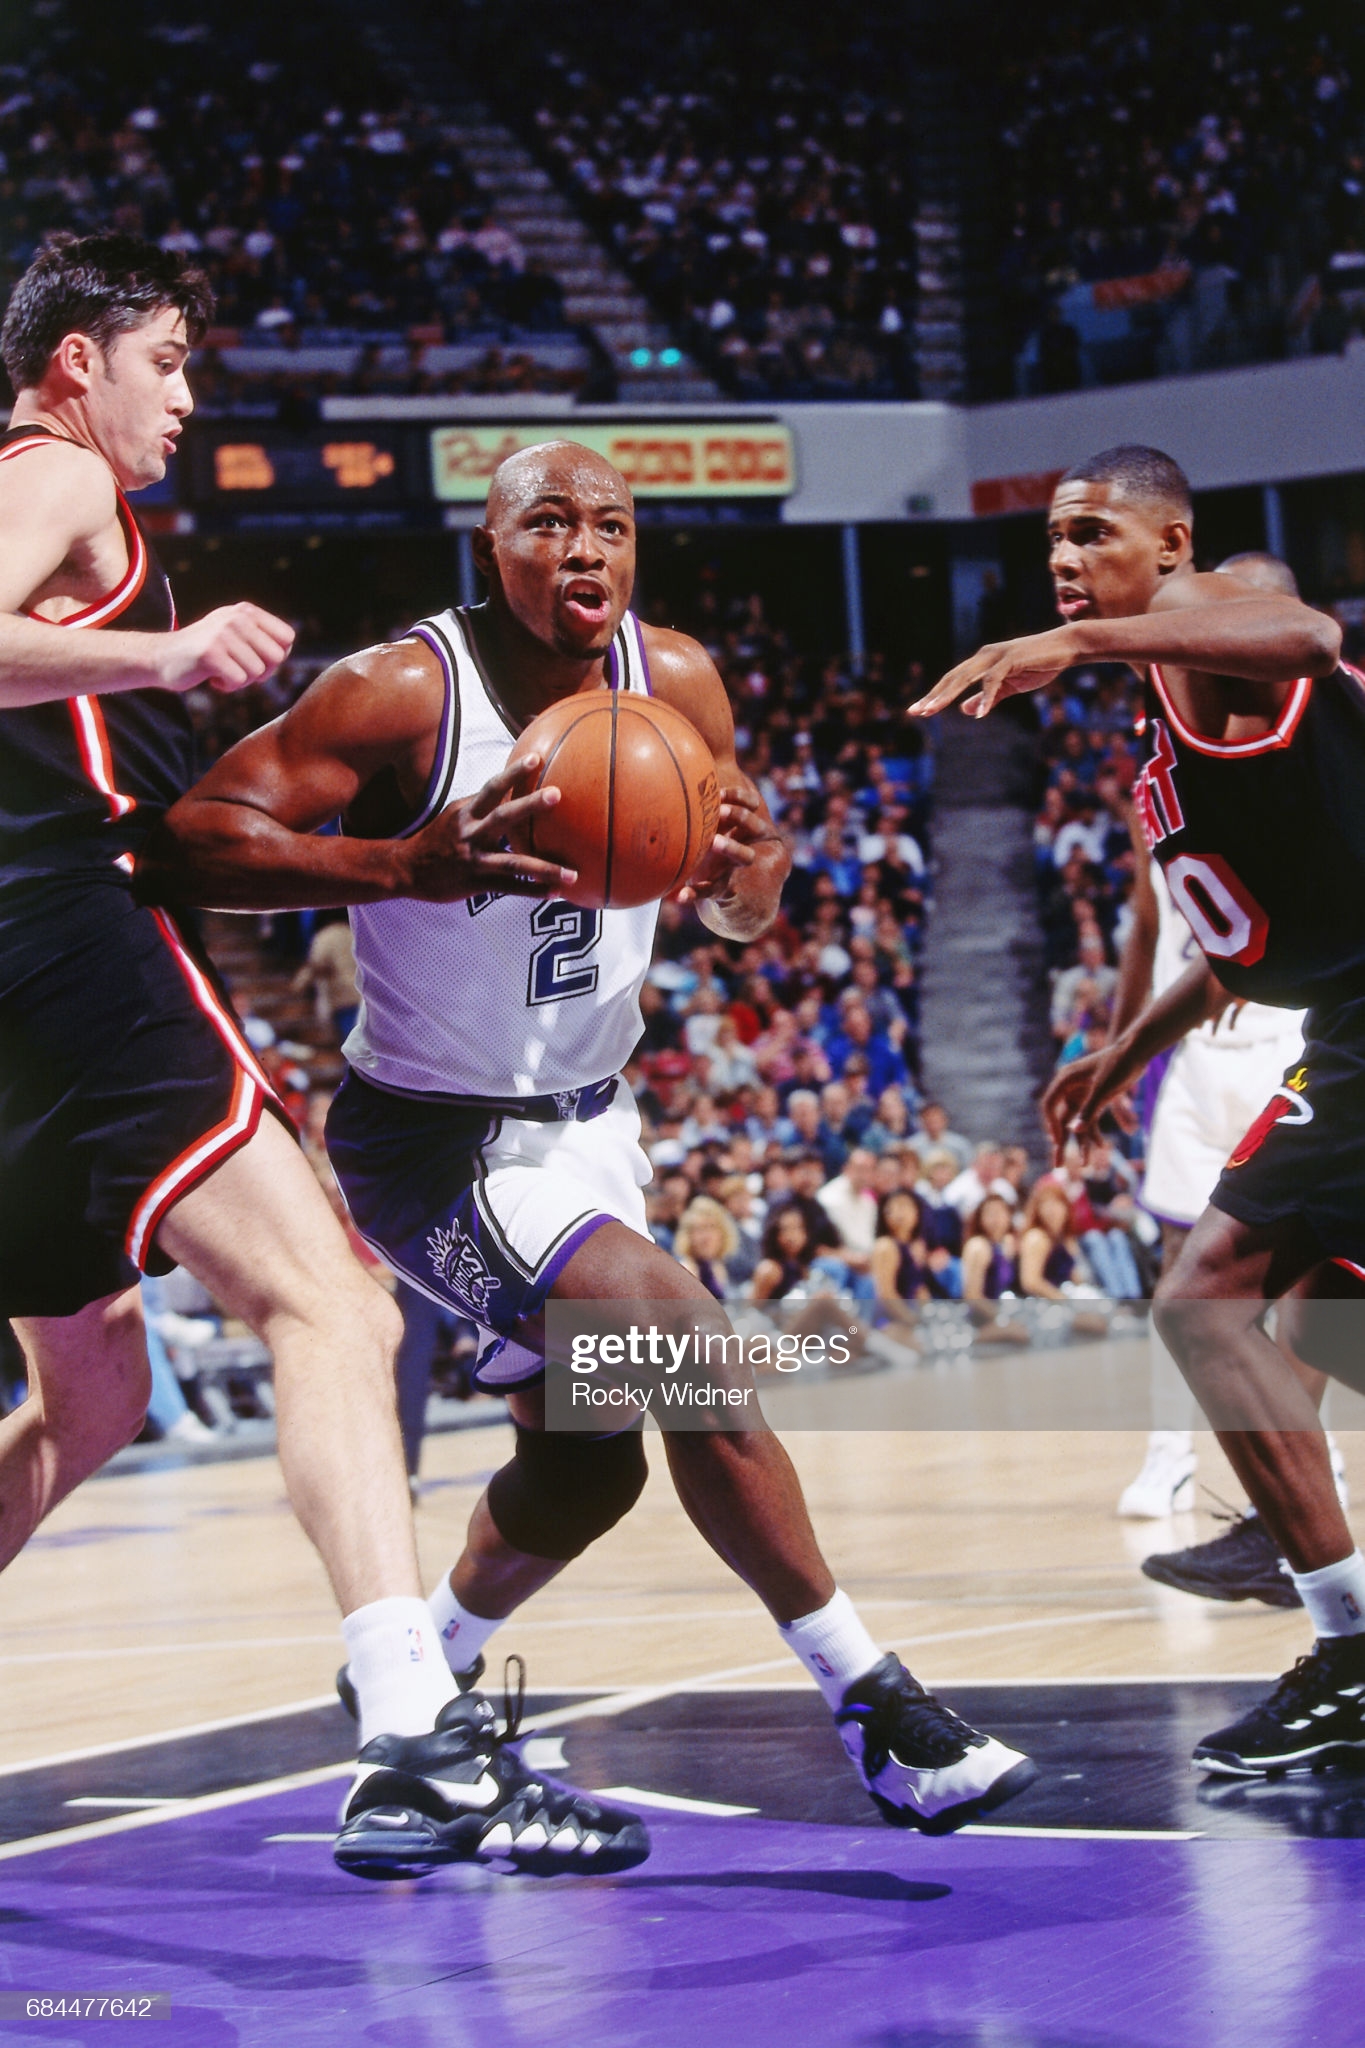 Mitch Richmond wearing the Air Jordan 10 Sacramento PE (different than the general release colorway) against the Heat. on 1/1/1995 from Rocky Widner/Getty